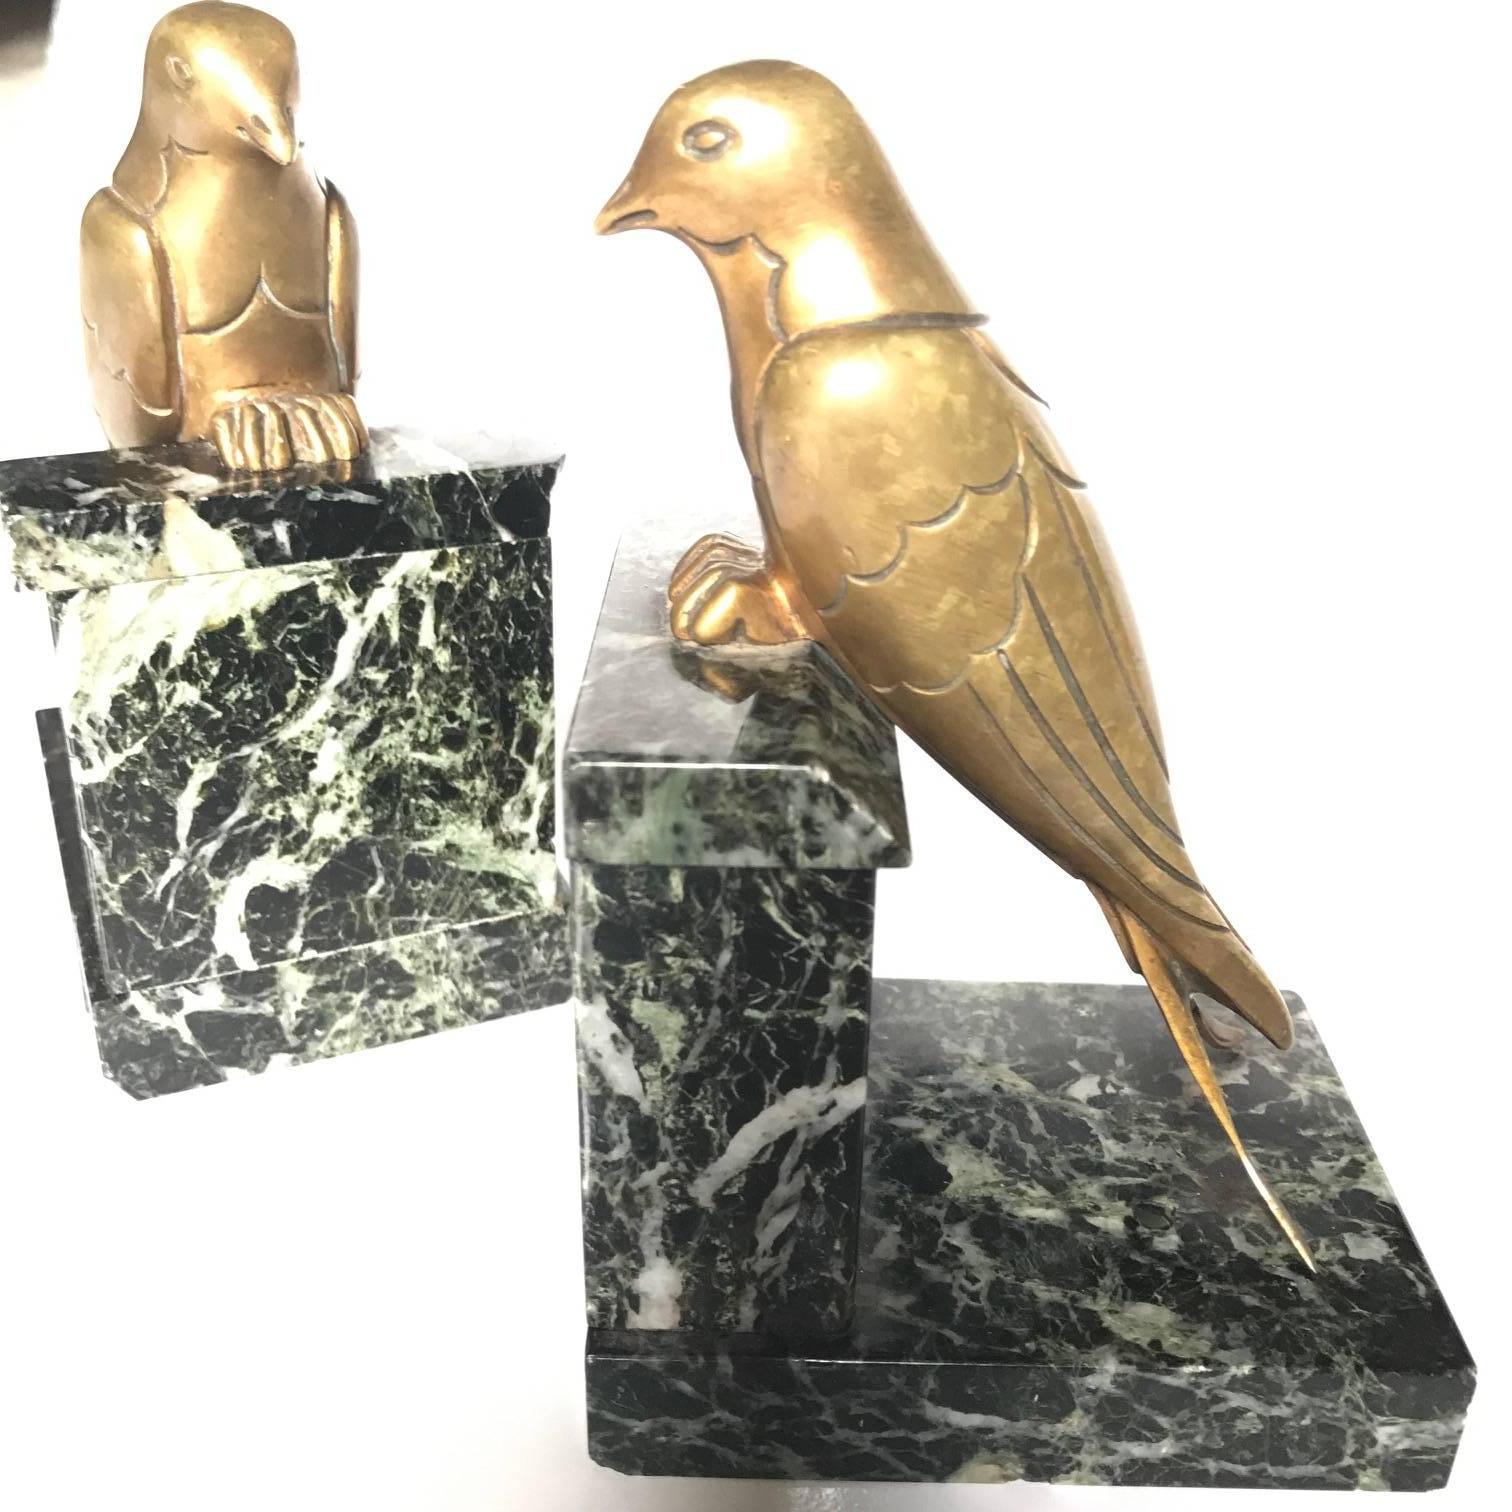 French 1930s Art Deco bronze Swallow bird bookends mounted on marble bases by Suzanne Bizard, marked 